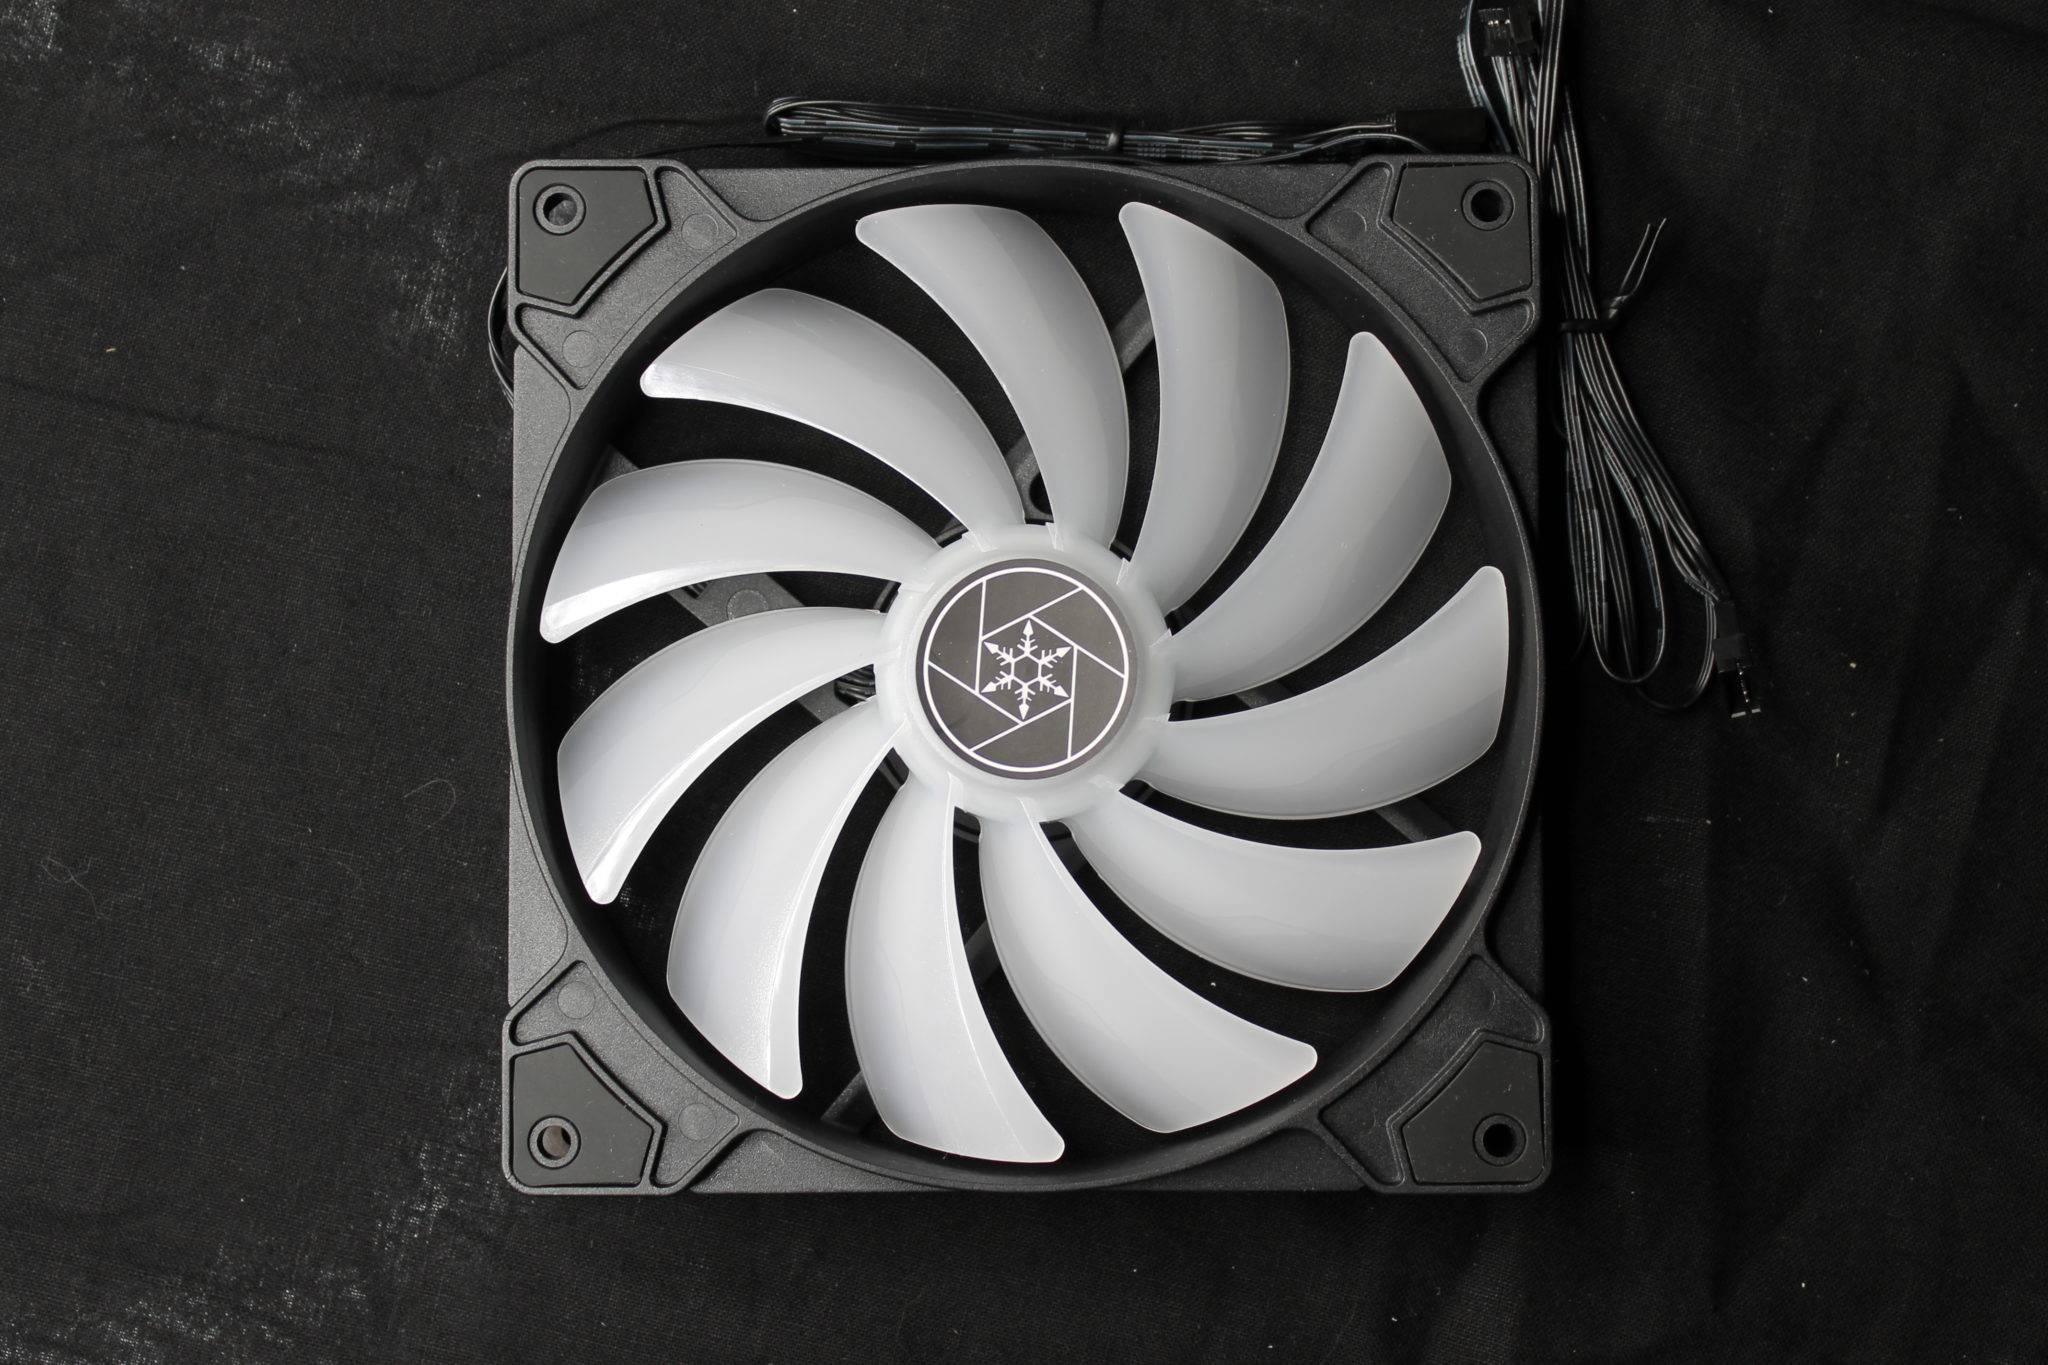 SilverStone IceGem 280 AIO Cooler Review - The FPS Review